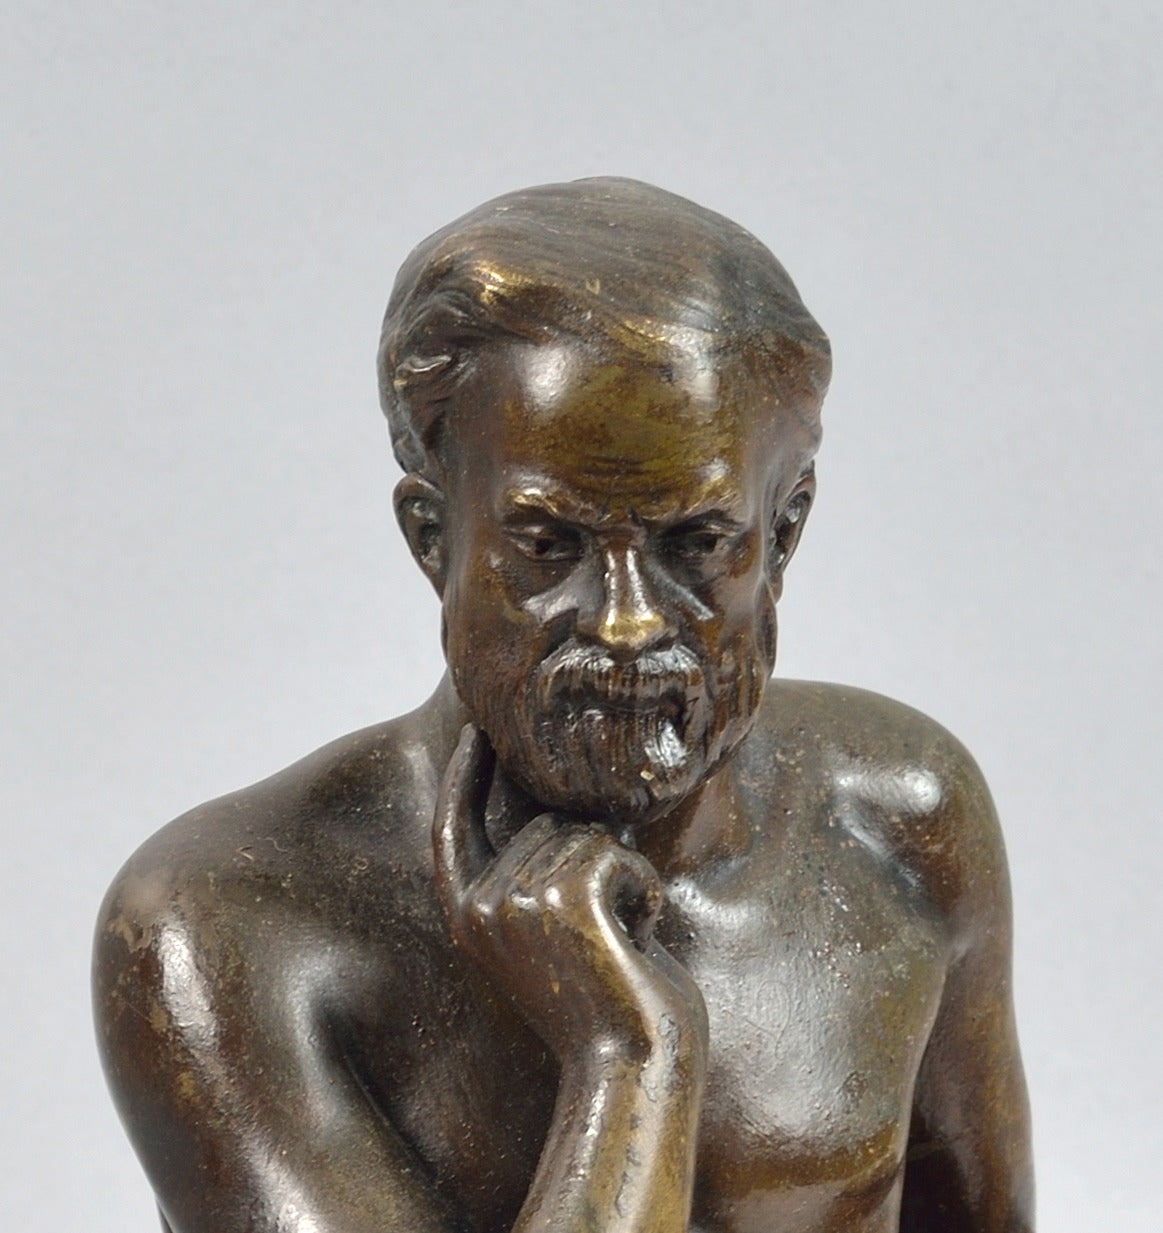 Edouard Drouot.
French, 1859-1945.
Seated philosopher.
Bronze, dark brown patina.
Signed E. Drouot, with founder stamp Etling Paris.
Raised on a marble base with flat back to fit against a vertical surface.
Height 25 cm.